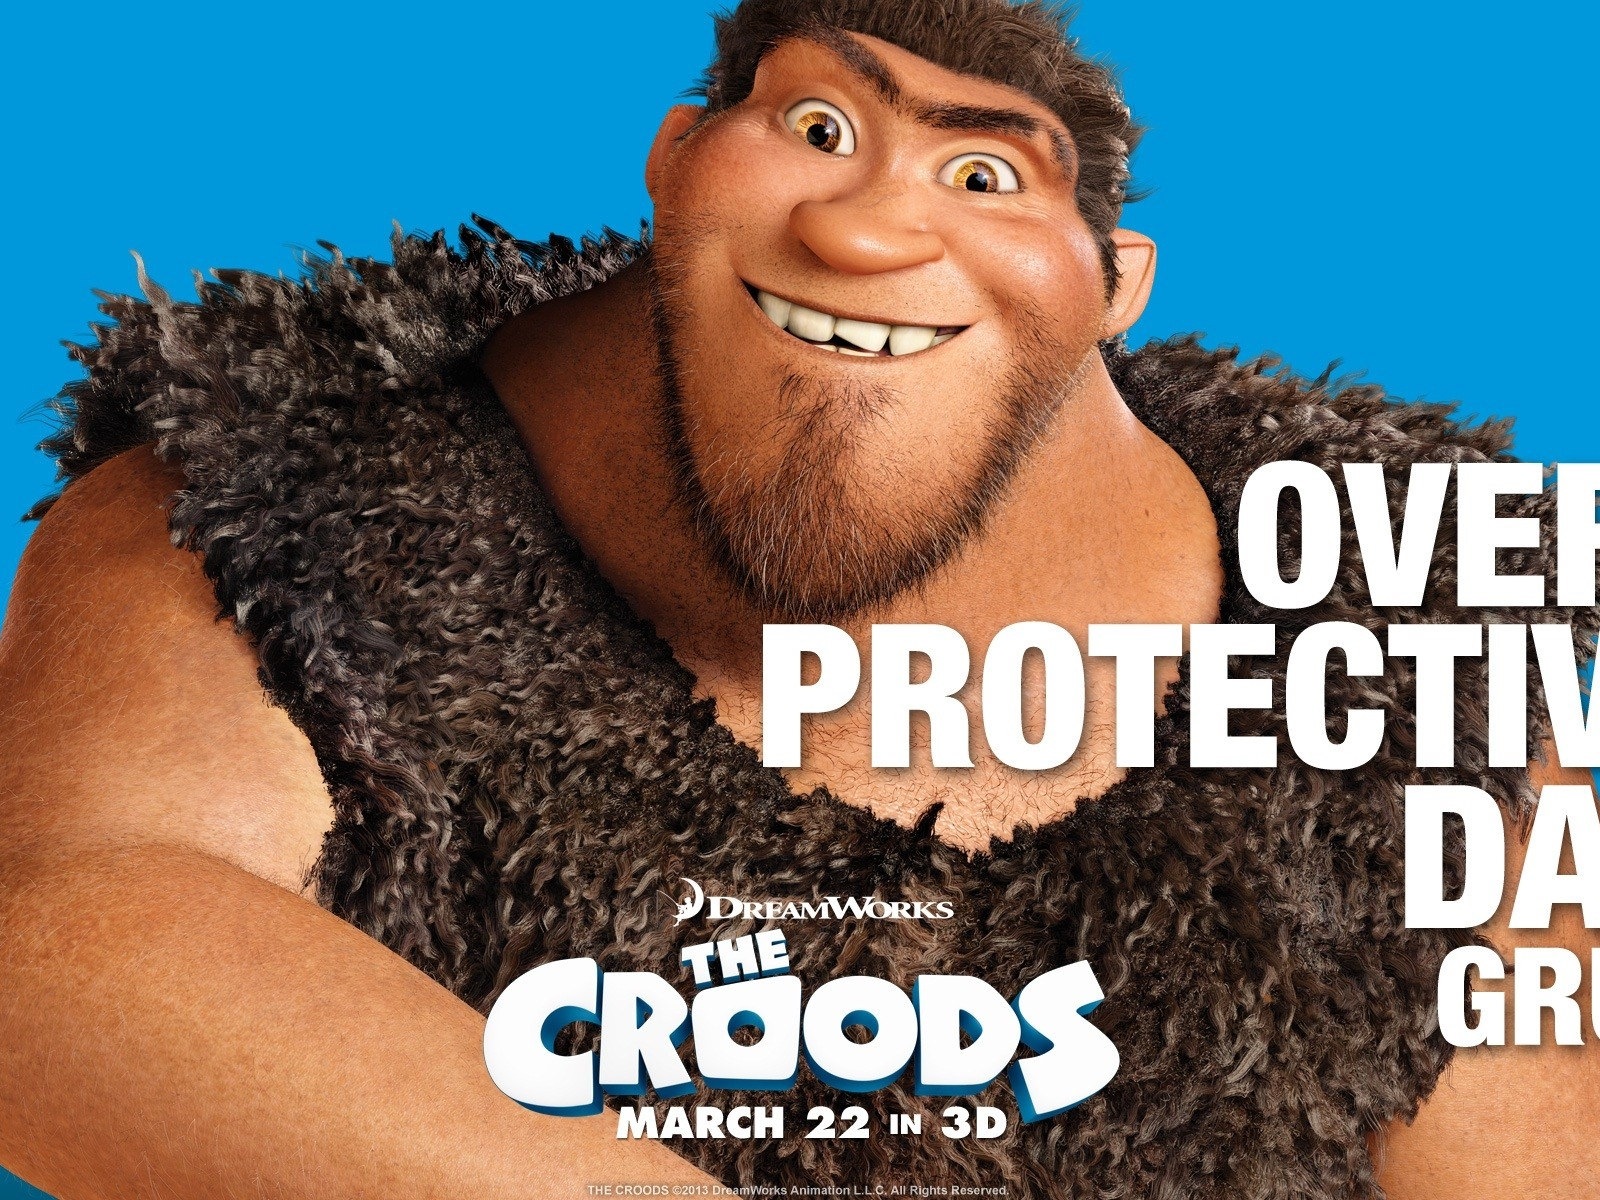 V Croods HD Movie Wallpapers #11 - 1600x1200